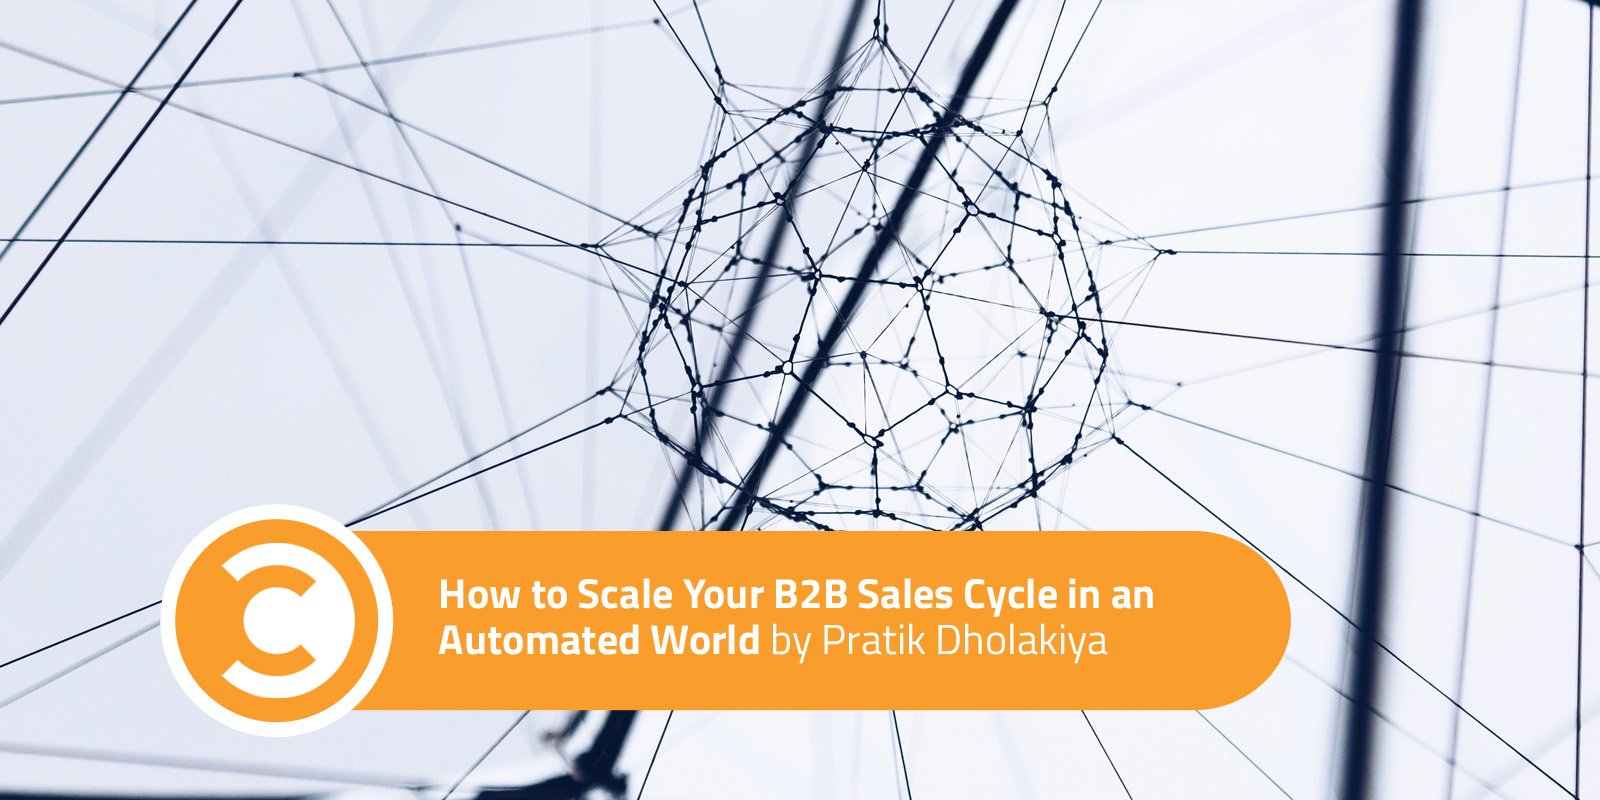 How to Scale Your B2B Sales Cycle in an Automated World